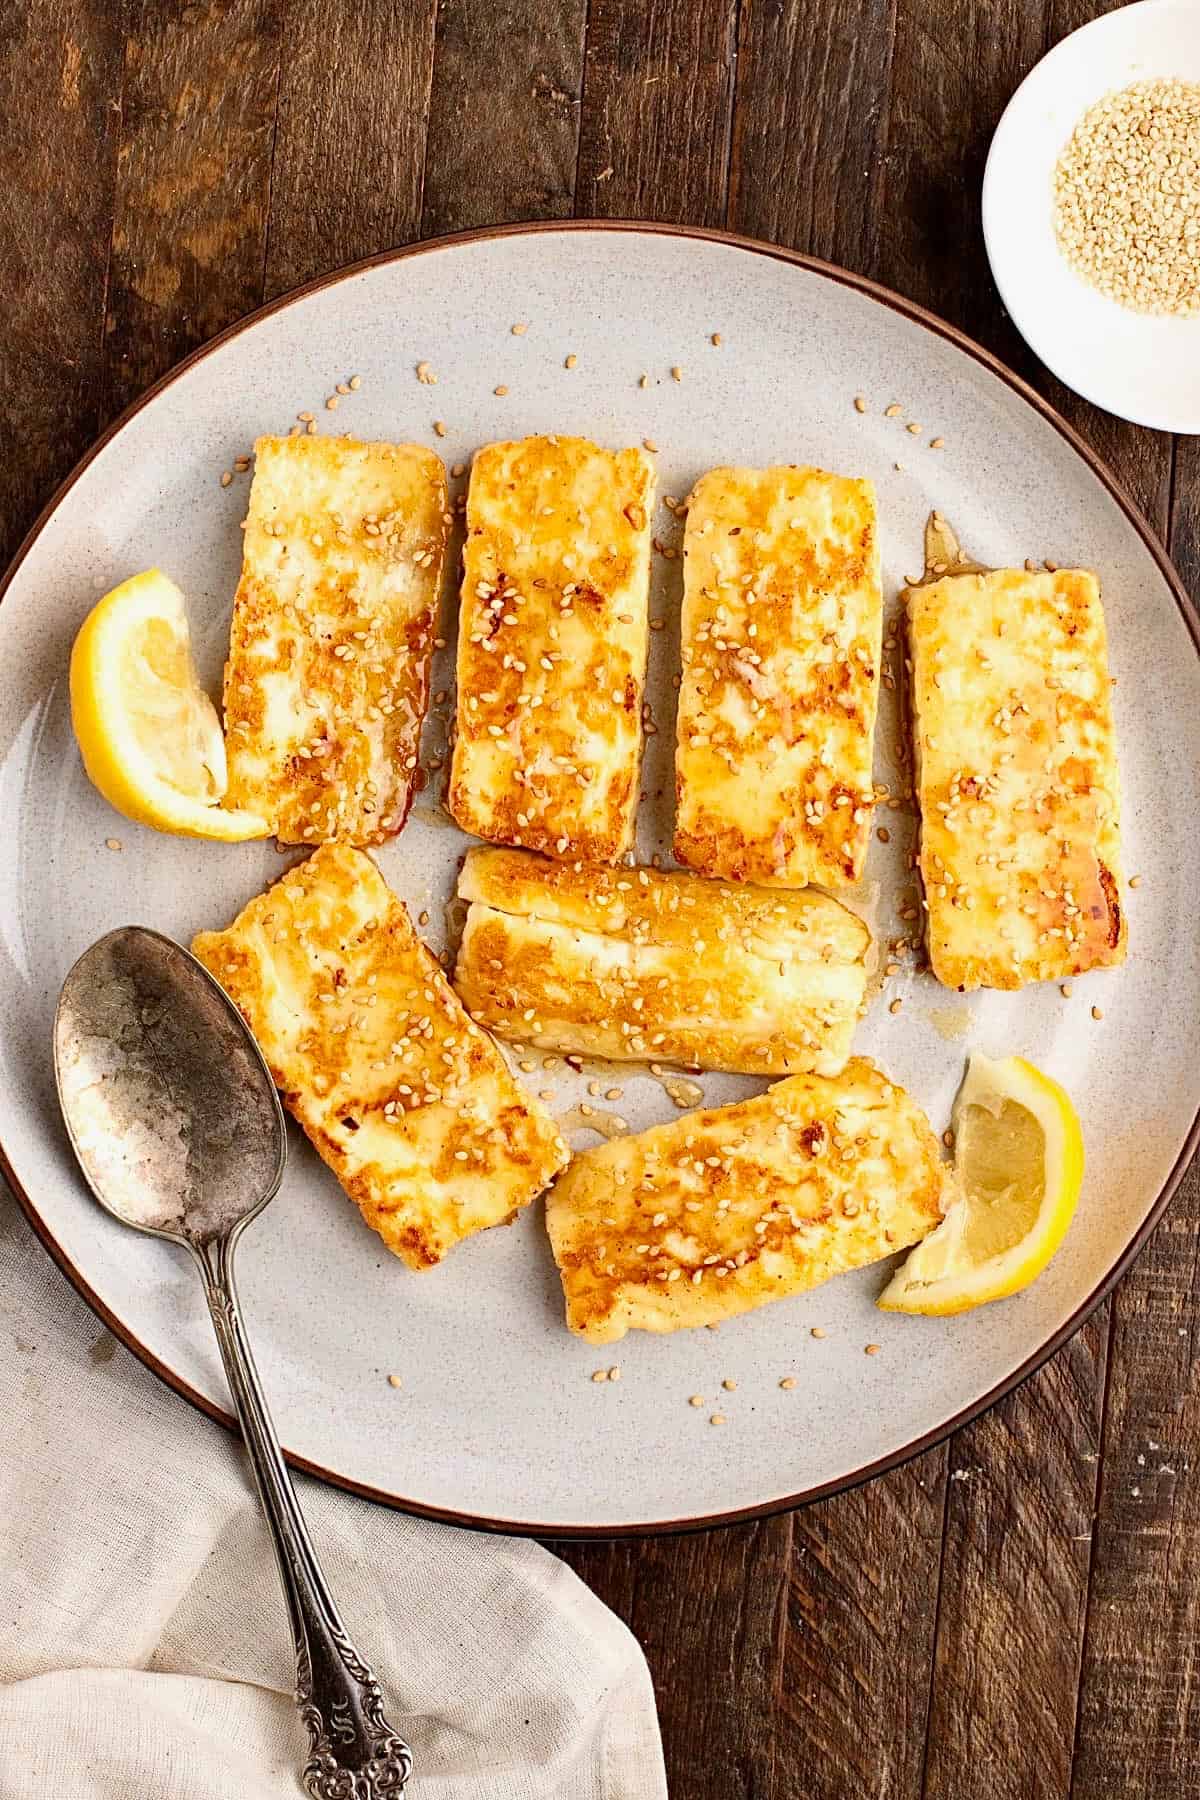 Fried Halloumi cheese with honey and sesame